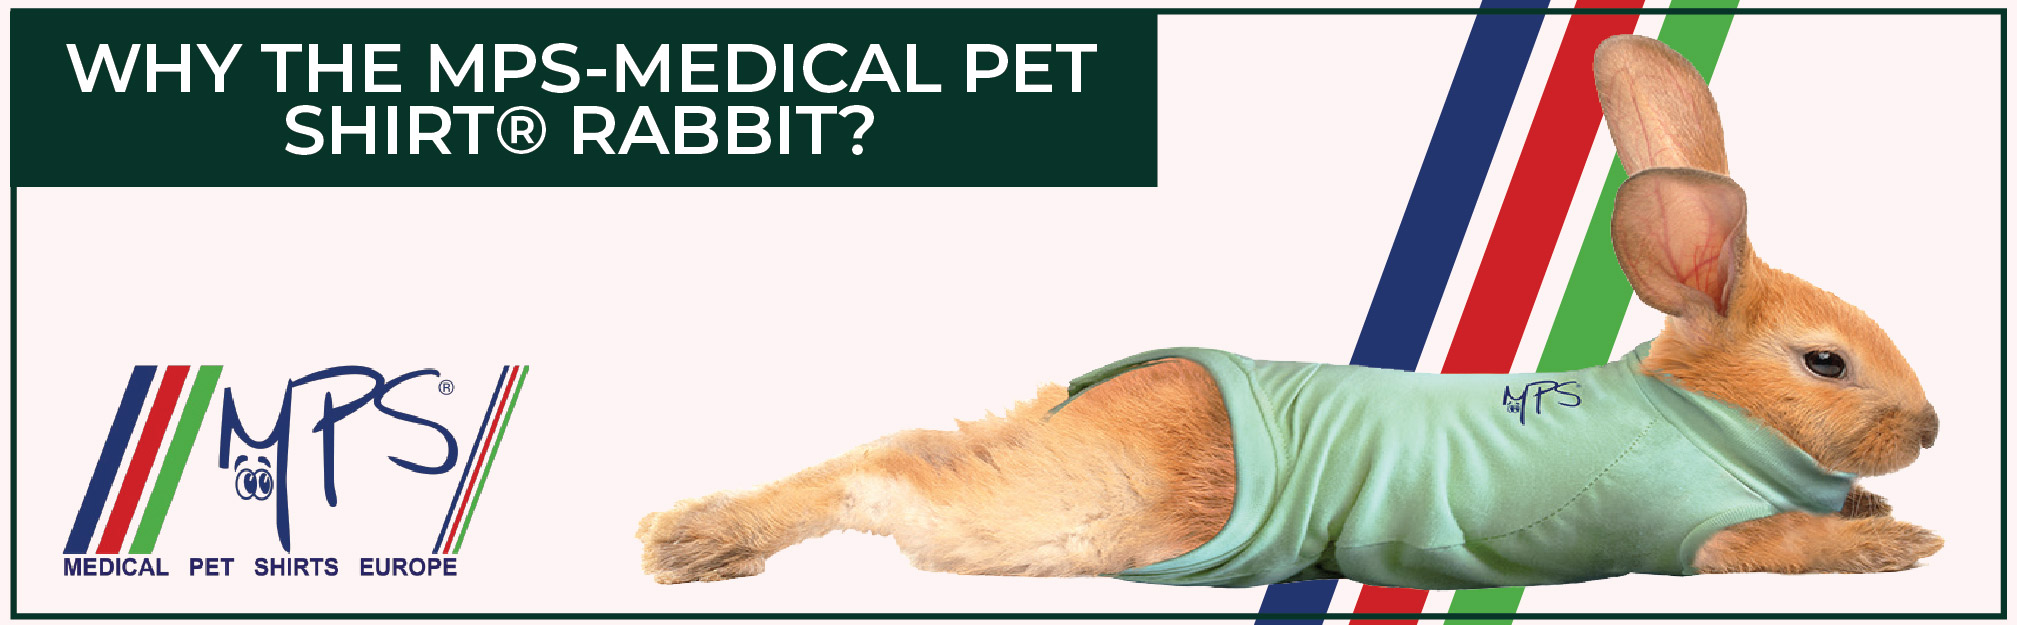 Why the MPS-MEDICAL PET SHIRT® RABBIT?